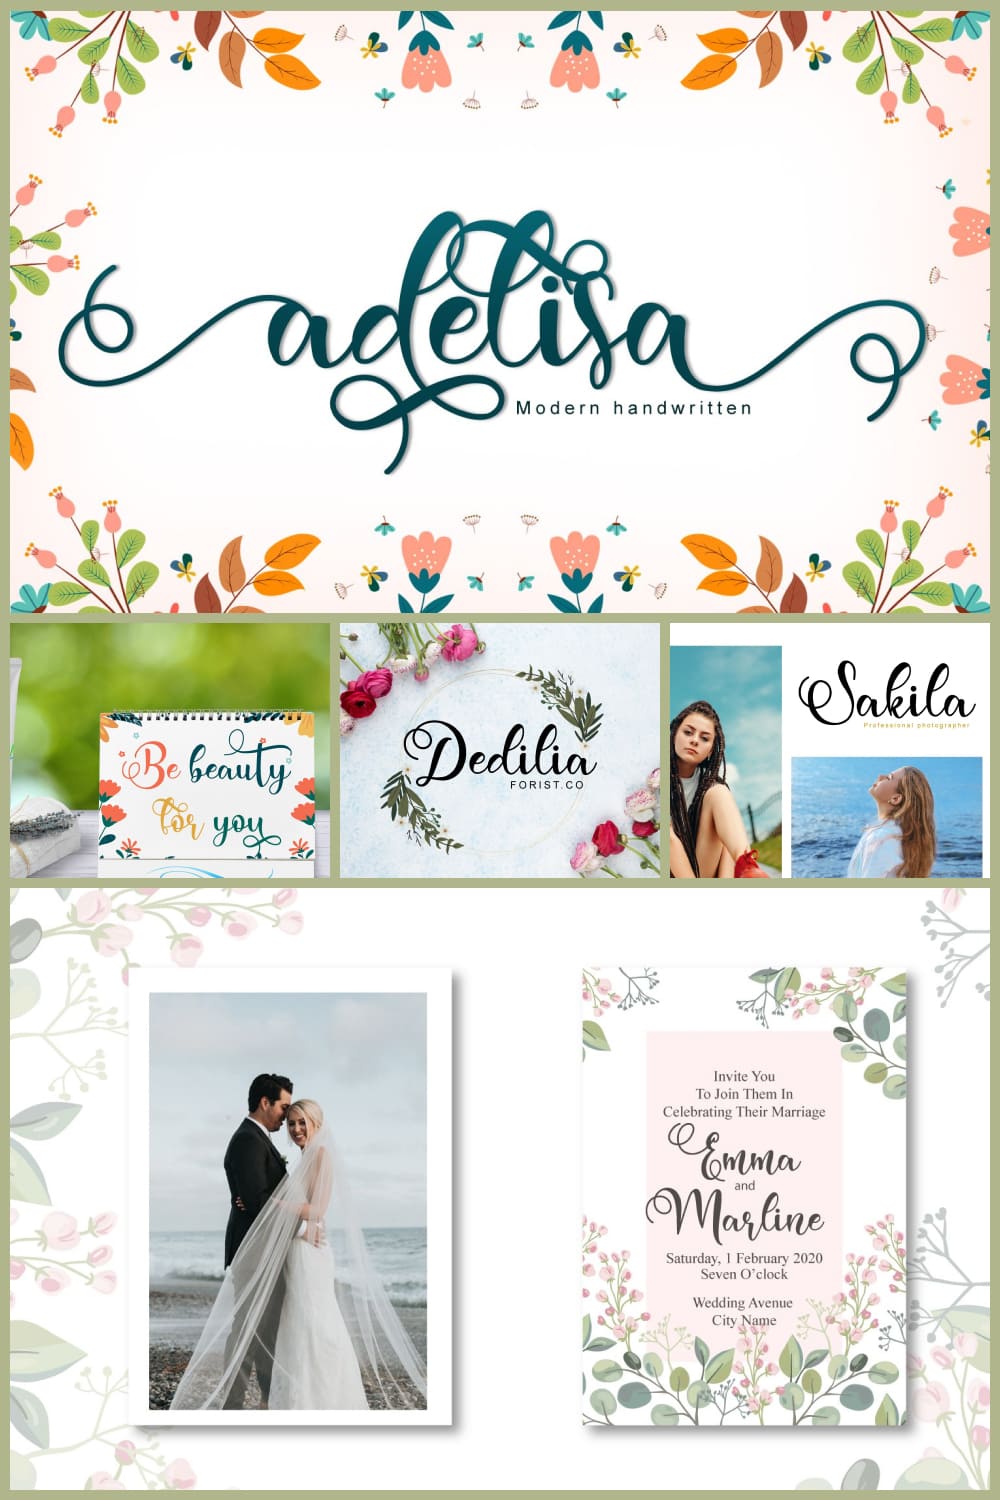 Collage of wedding cards and photos.